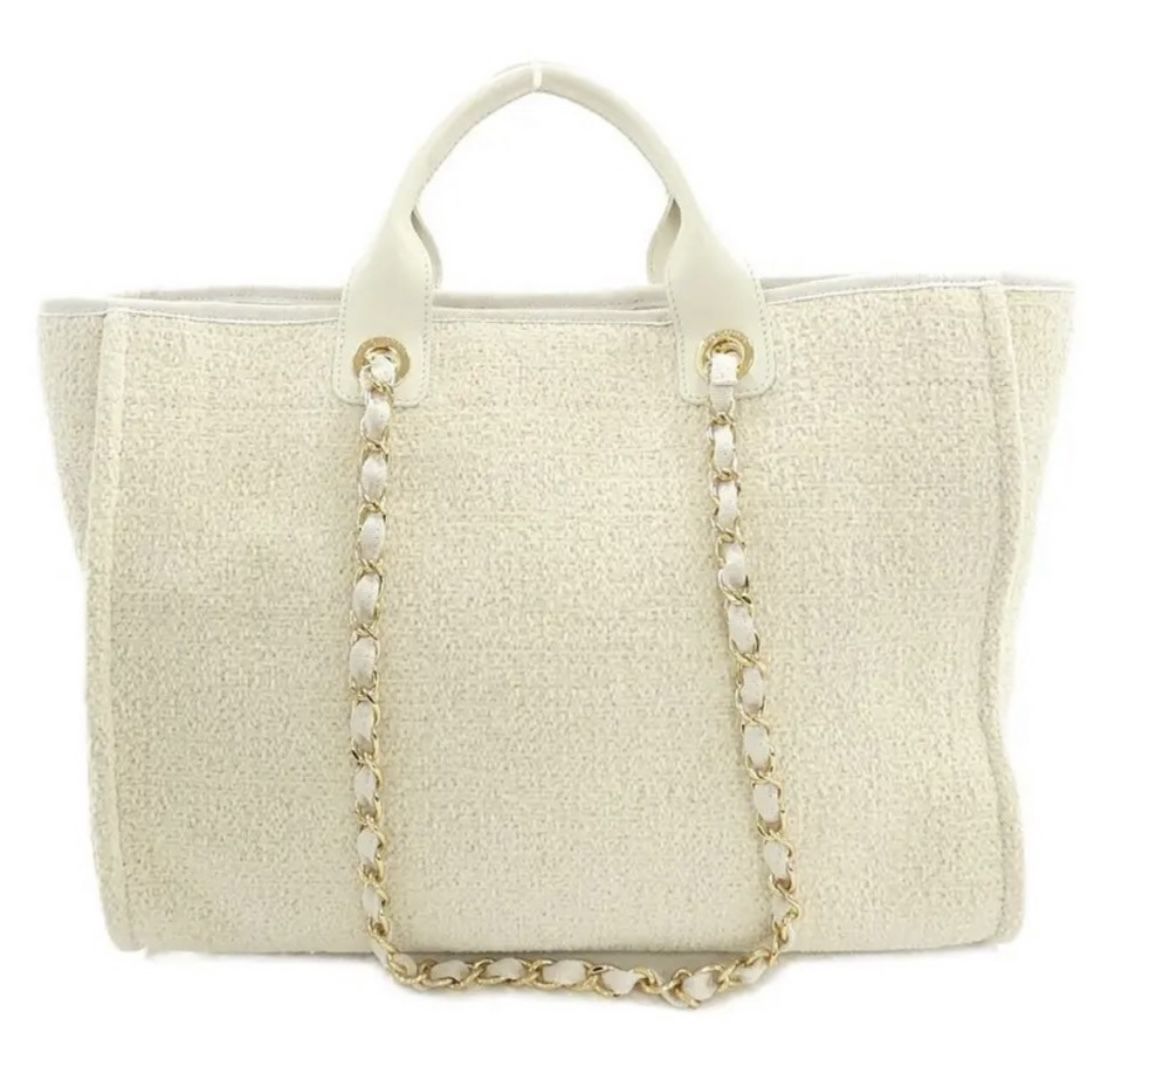 Chanel 22C Deauville Large Shopping Tote in Cream with Gold hardware